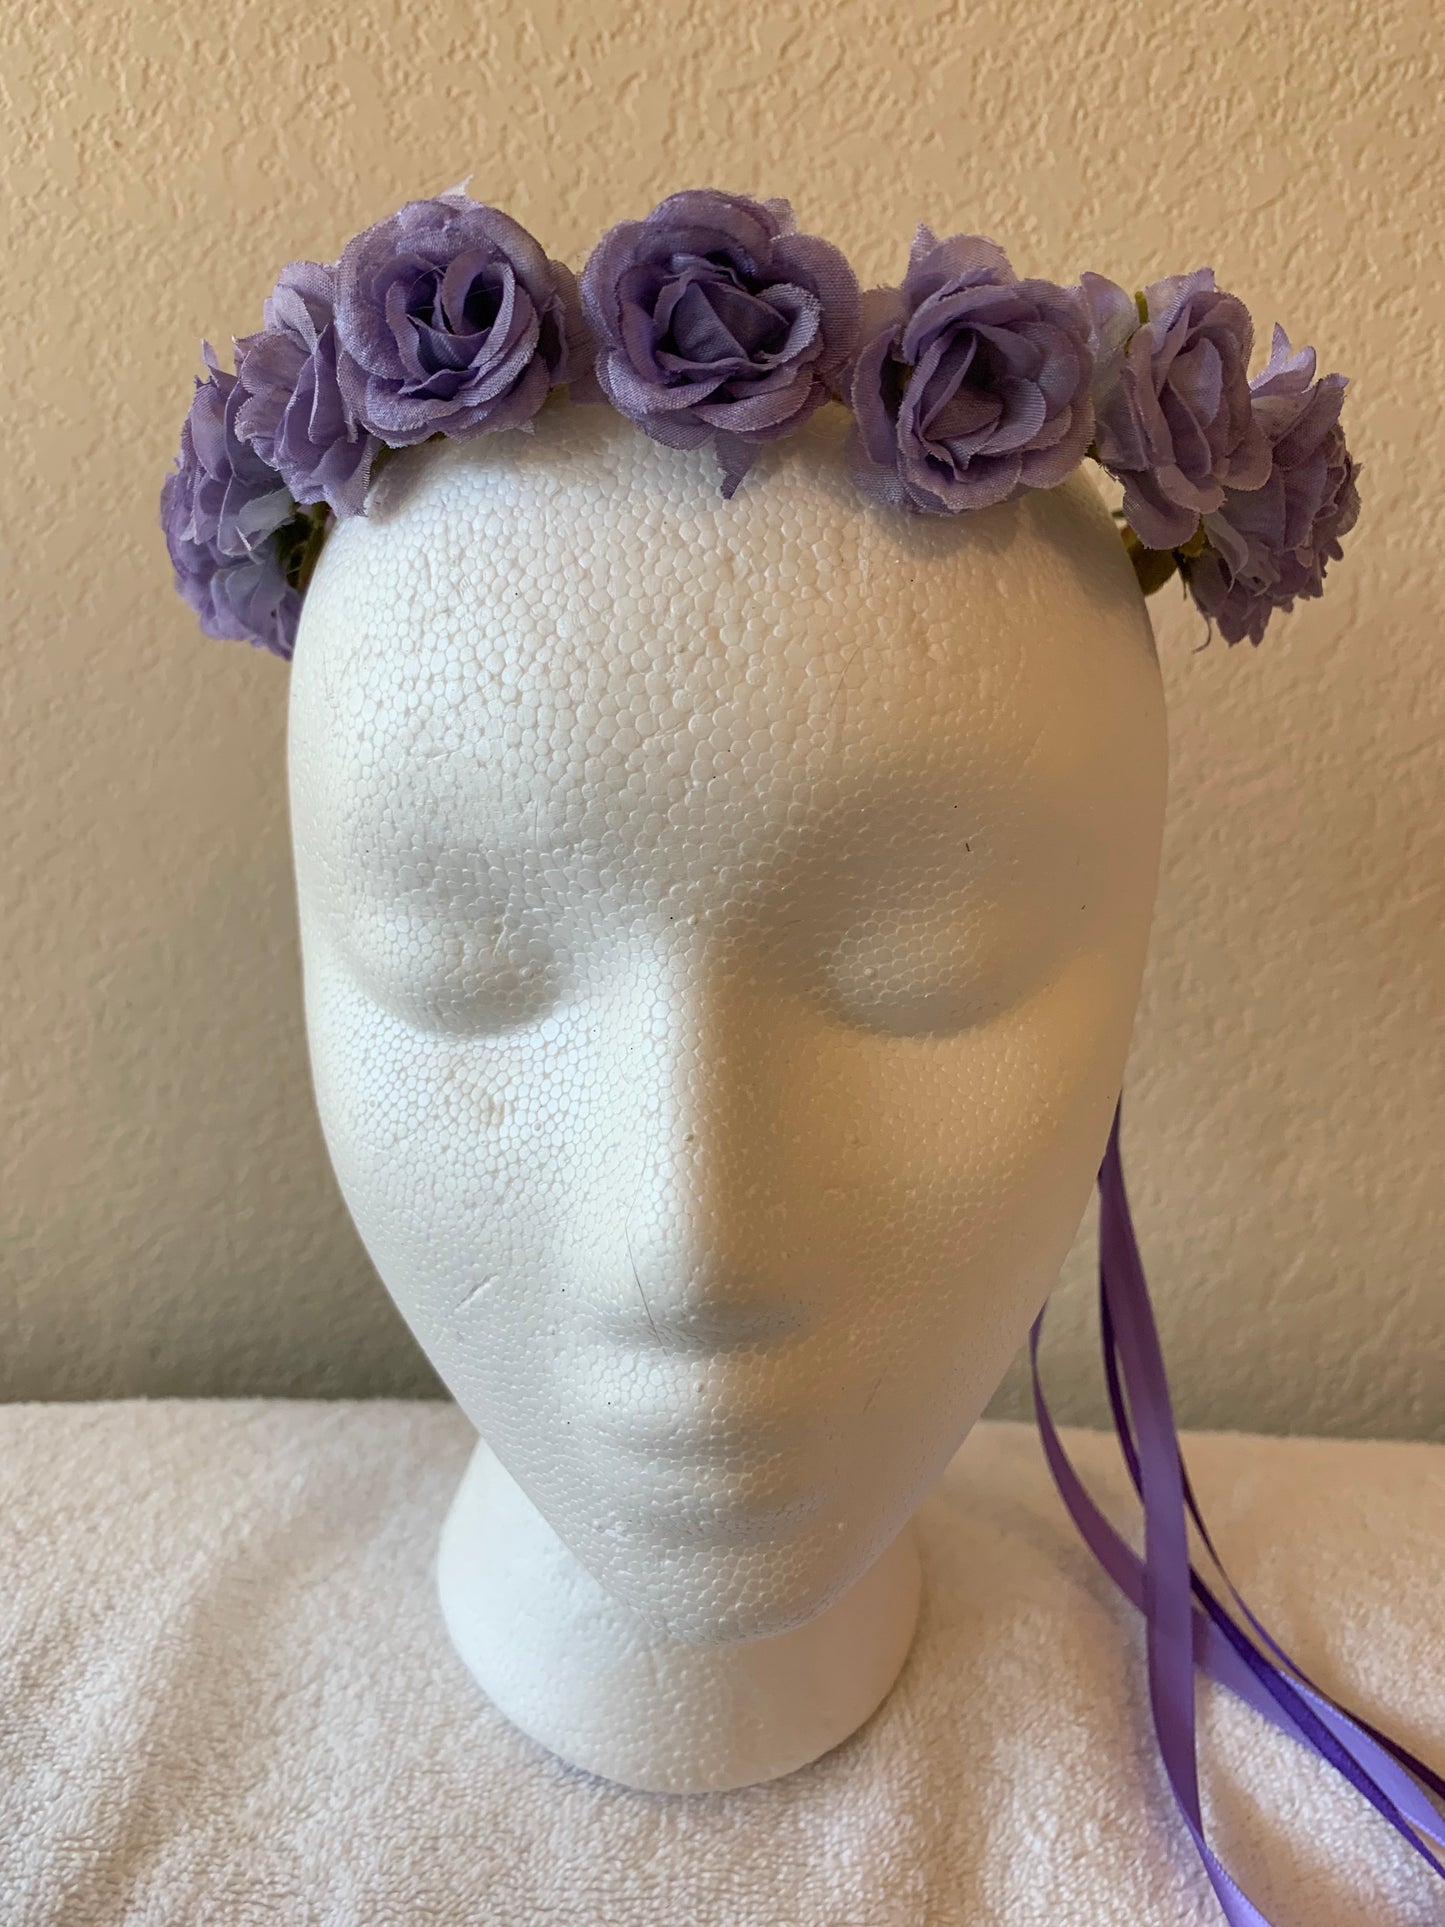 Extra Small Wreath - All Purple Roses